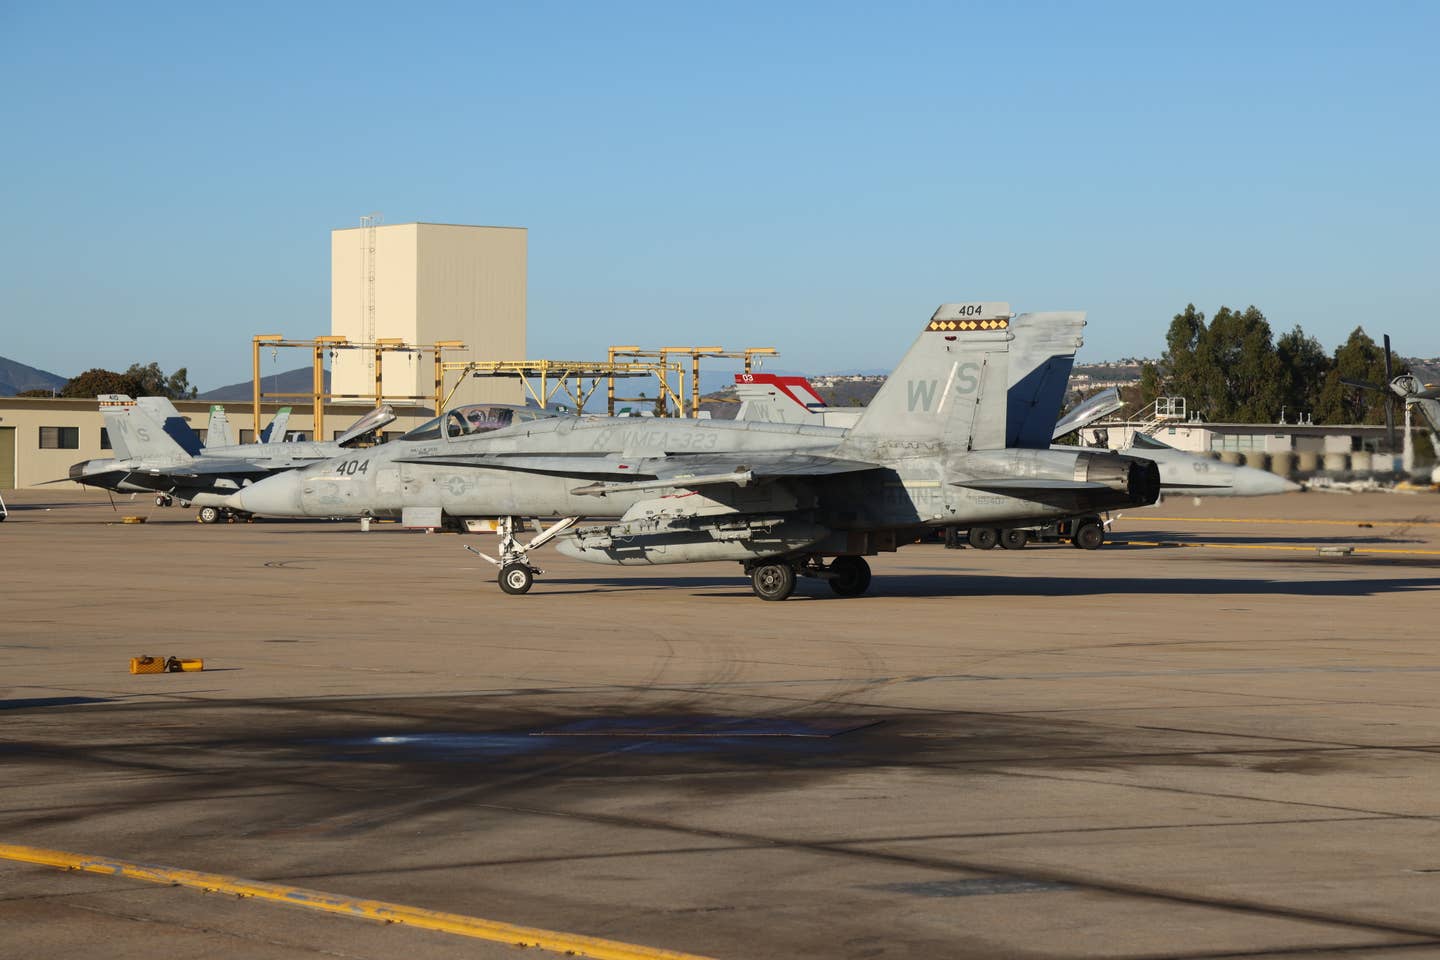 An F/A-18C from VMFA-323 taxis at MCAS Miramar during Steel Knight. (James Deoer/Author)